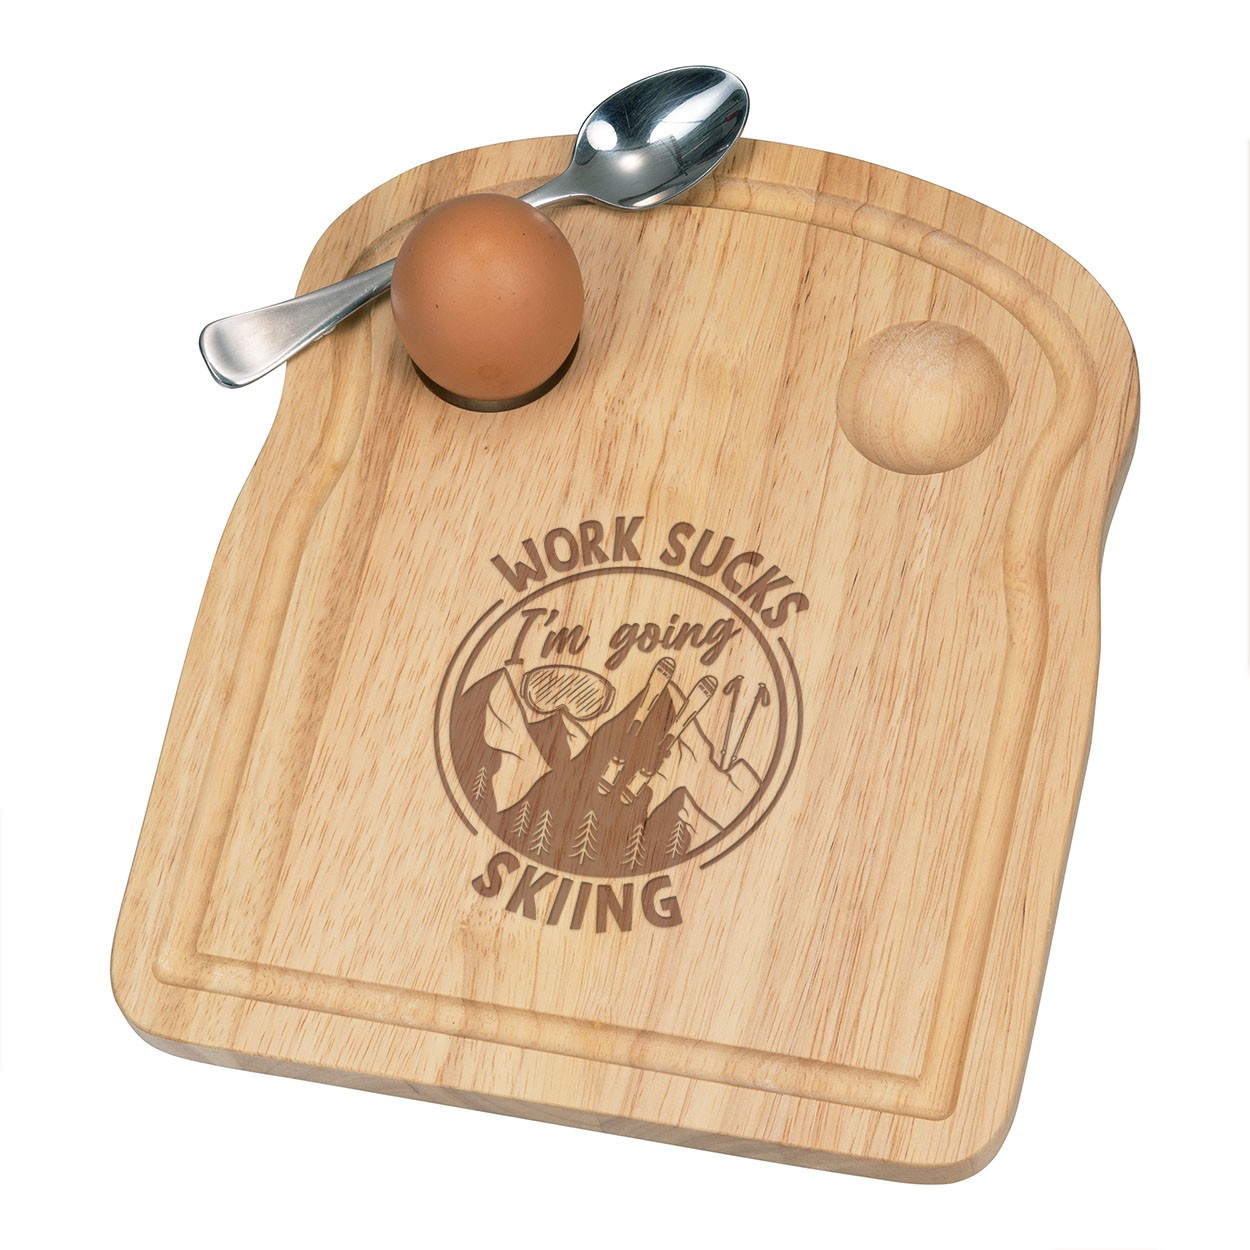 Work Sucks I'm Going Skiing Breakfast Dippy Egg Cup Board Wooden